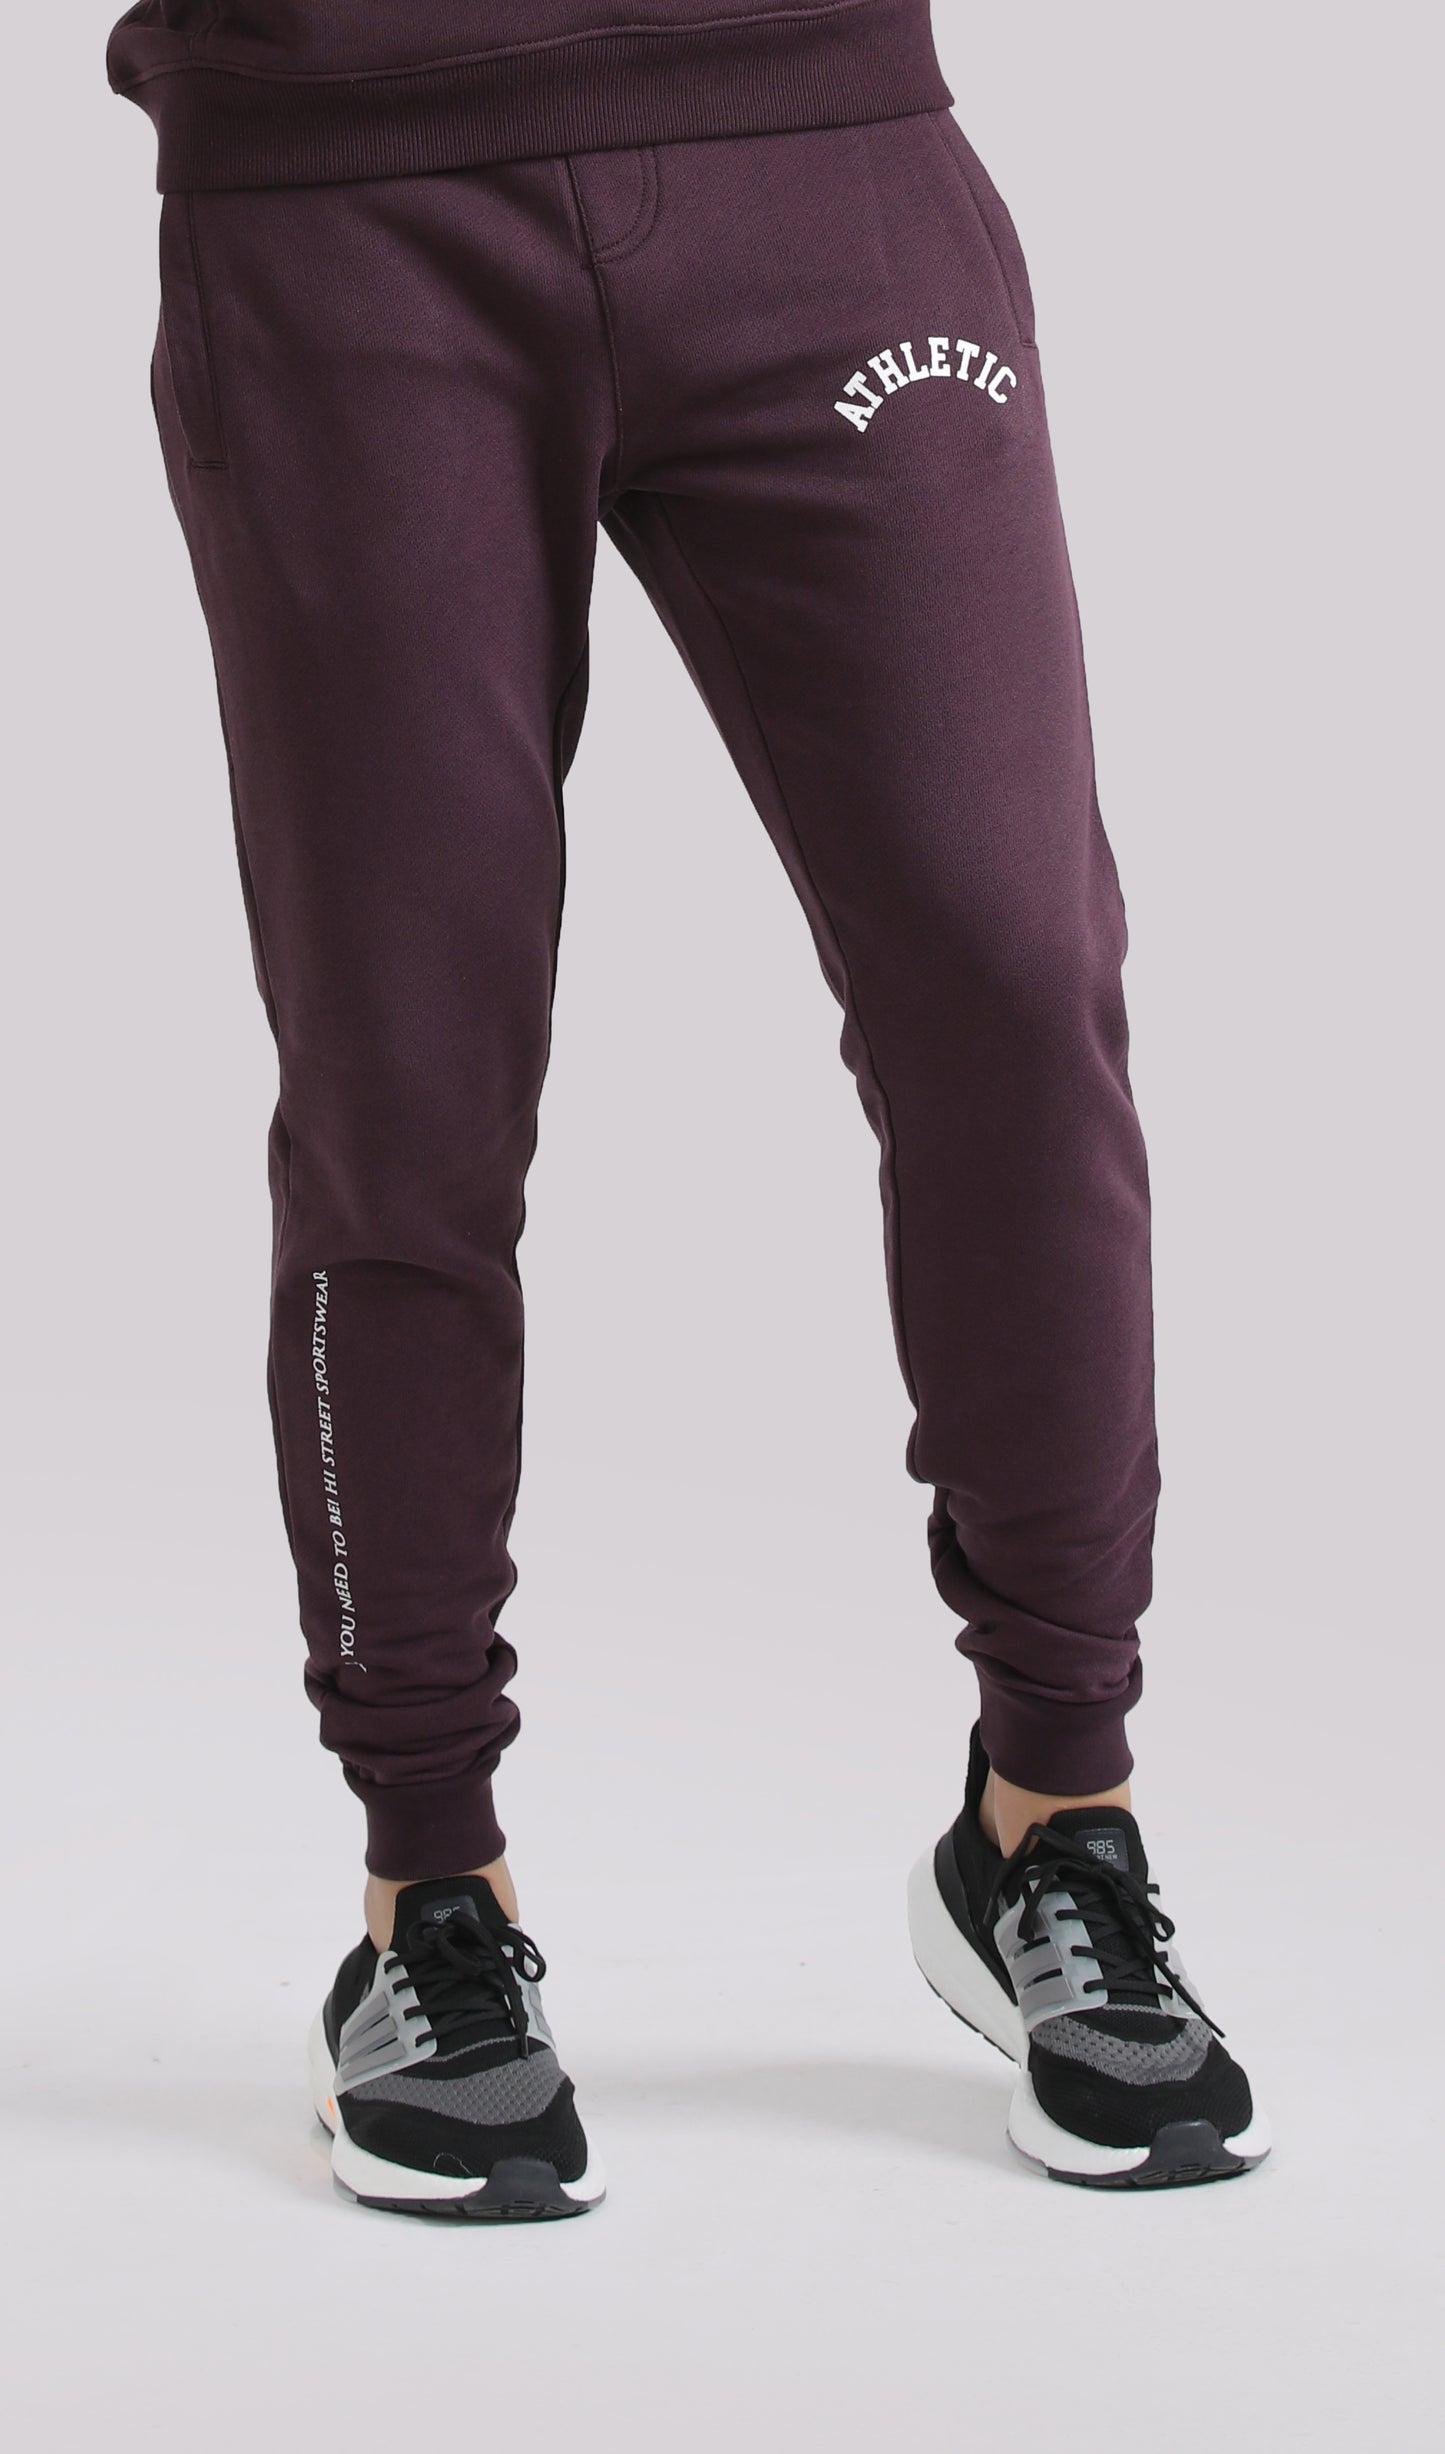 CONTRAST PRINTED TROUSER